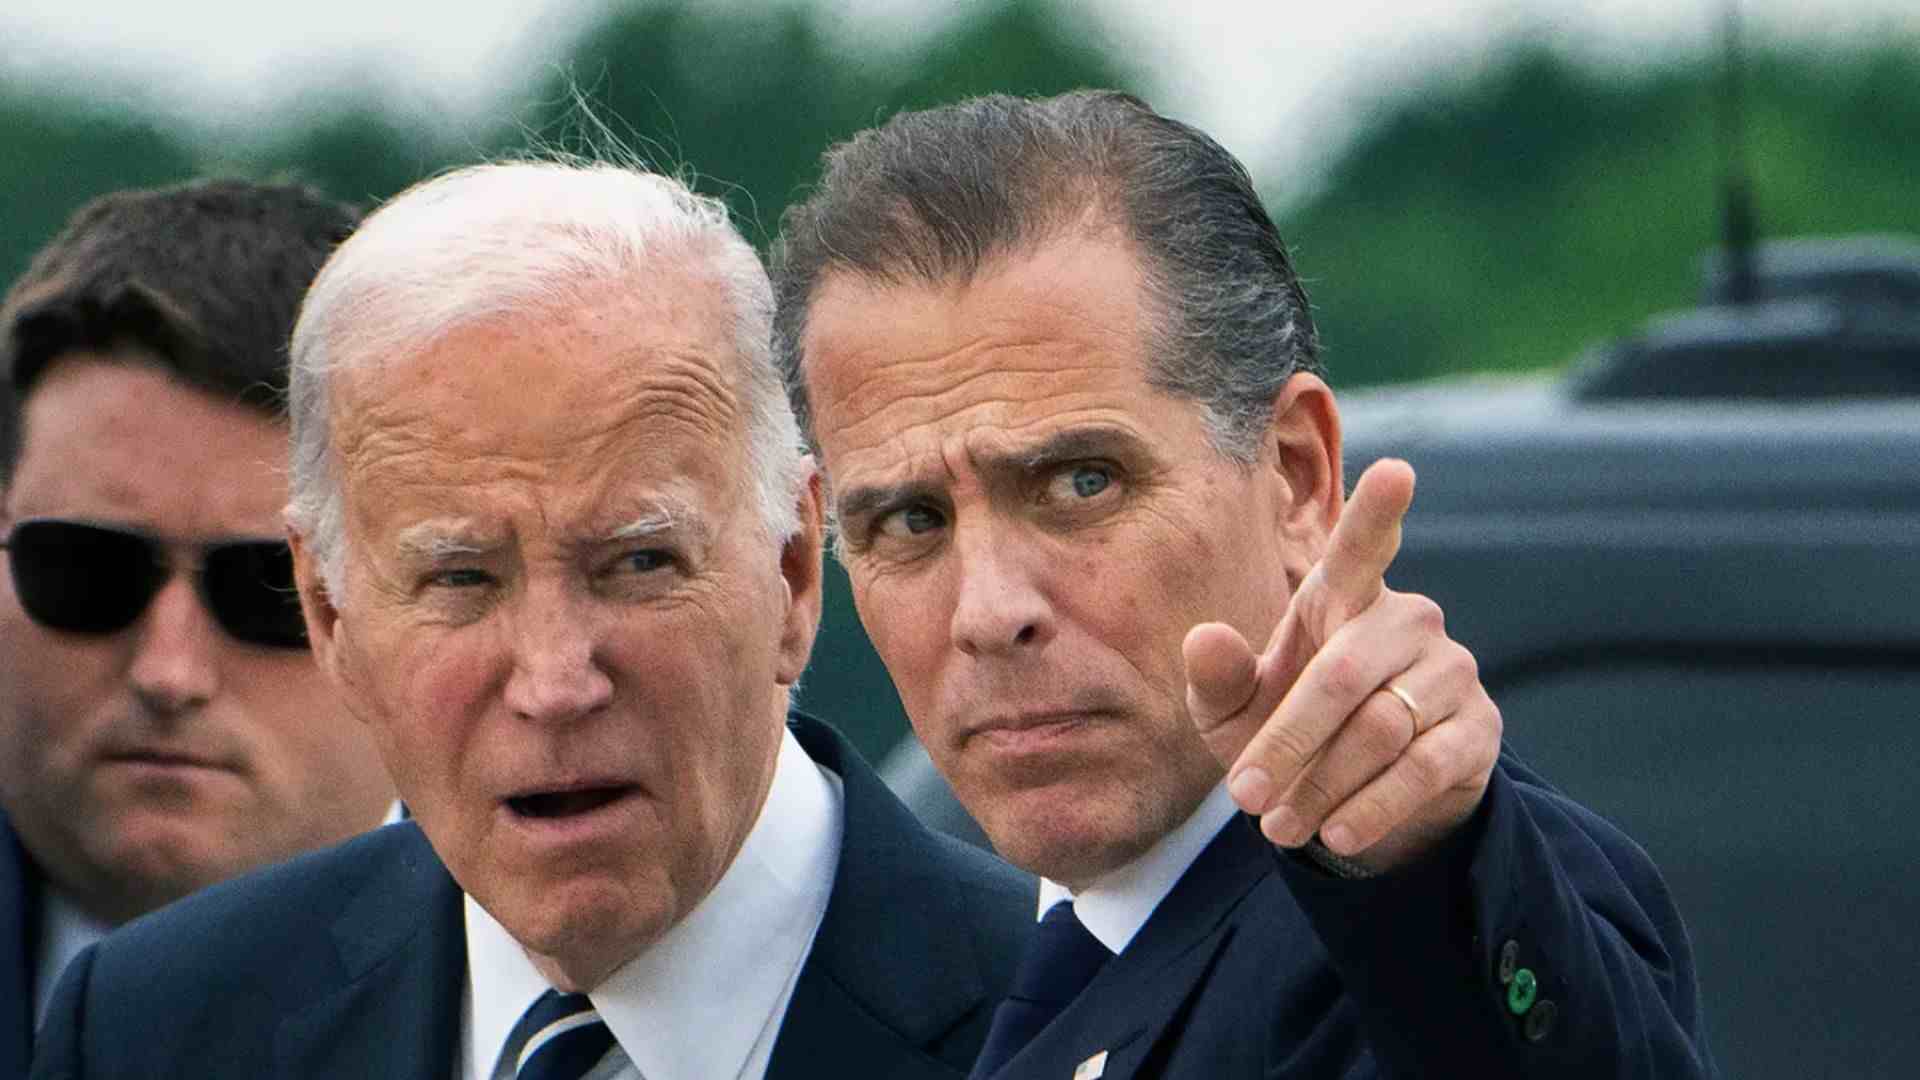 Hunter Biden Drops Lawsuit Against Fox News Over Nude Photos In Mock Trial Show